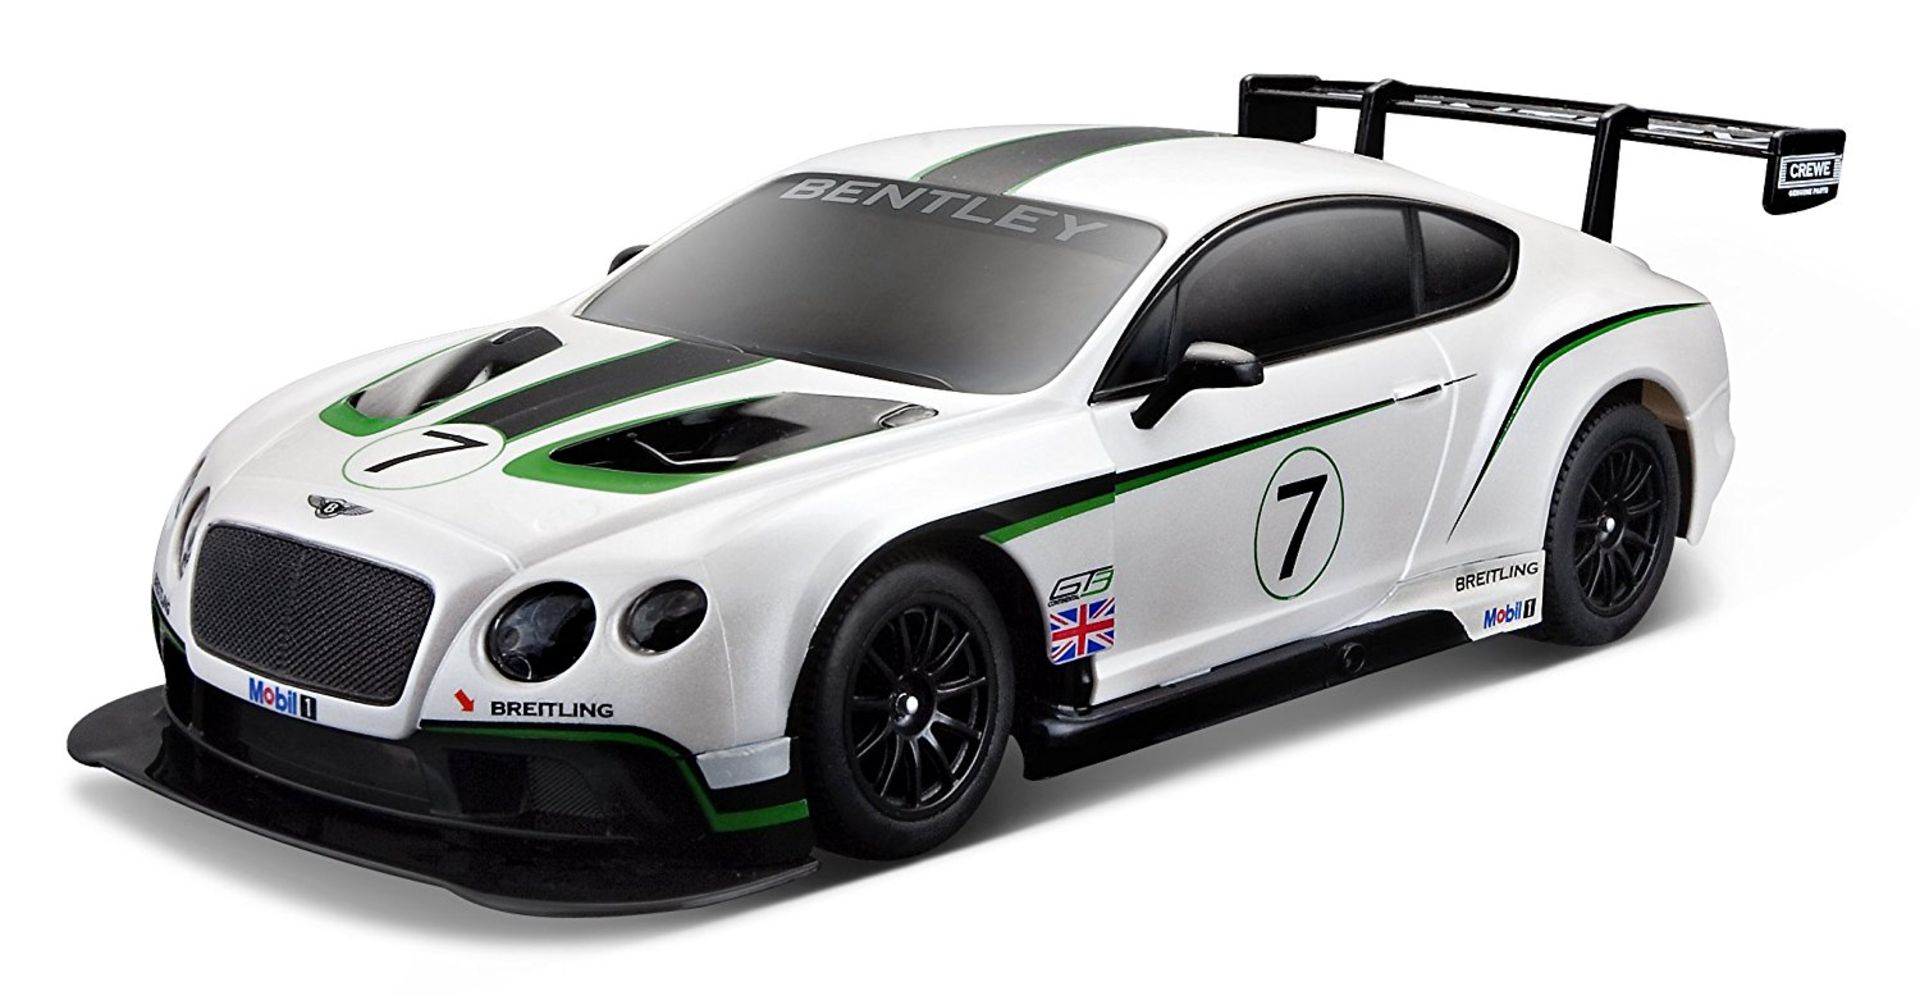 V Brand New R/C 1:14 Scale Bentley Continental GT3 - Amazon price £36.99 - Colours May Vary